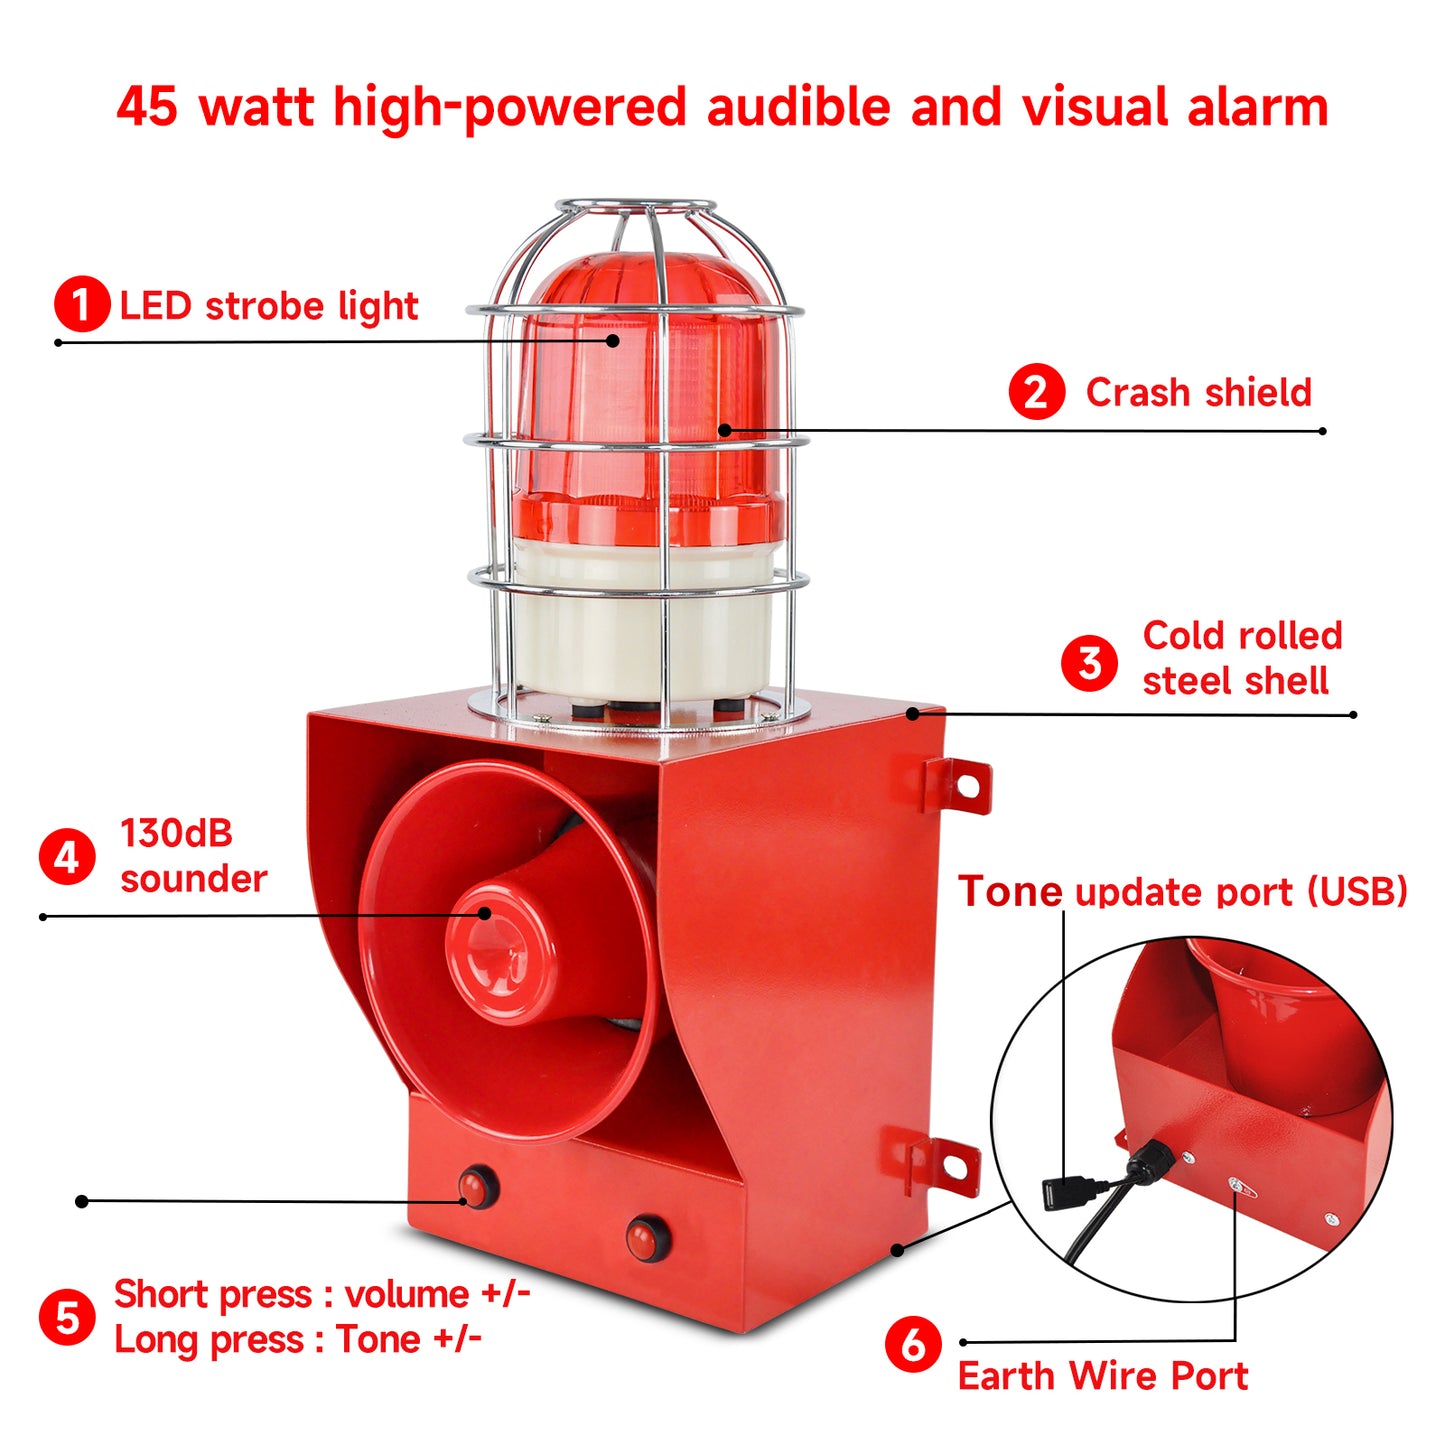 45W Alarm Siren with Metal Anti-Collision Mesh Cover, 0-130dB loud Horn 12 Tones Switchable, IP65 Waterproof LED Strobe Light for Factories, terminals, Security home Alarm SLA-05C